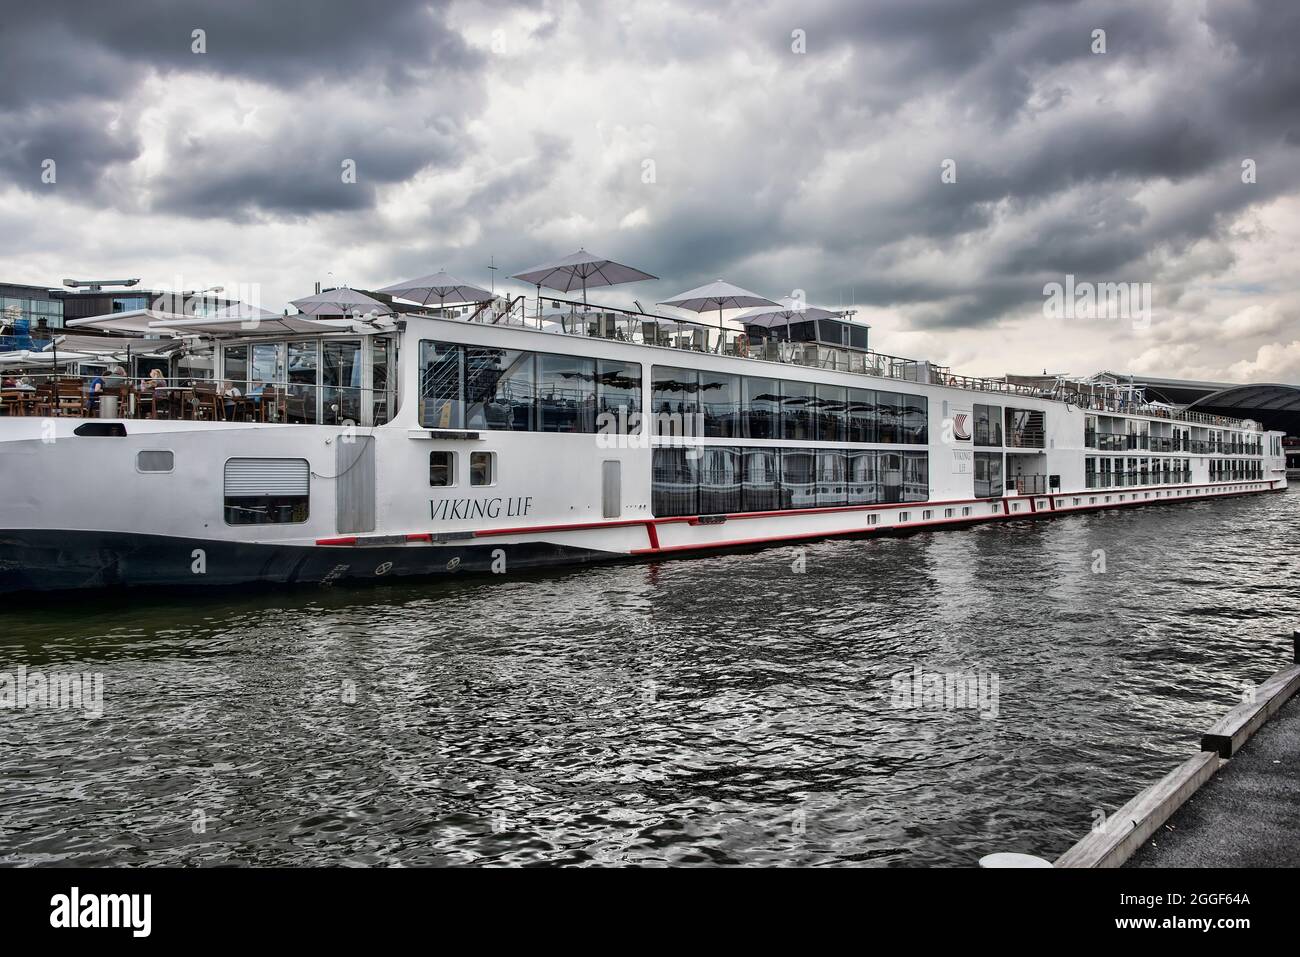 Amsterdam, The Netherlands - July 13, 2017:  A Viking River Boat anchored in the port of Amsterdam, ready to embark on a Rhine River Cruise. Stock Photo